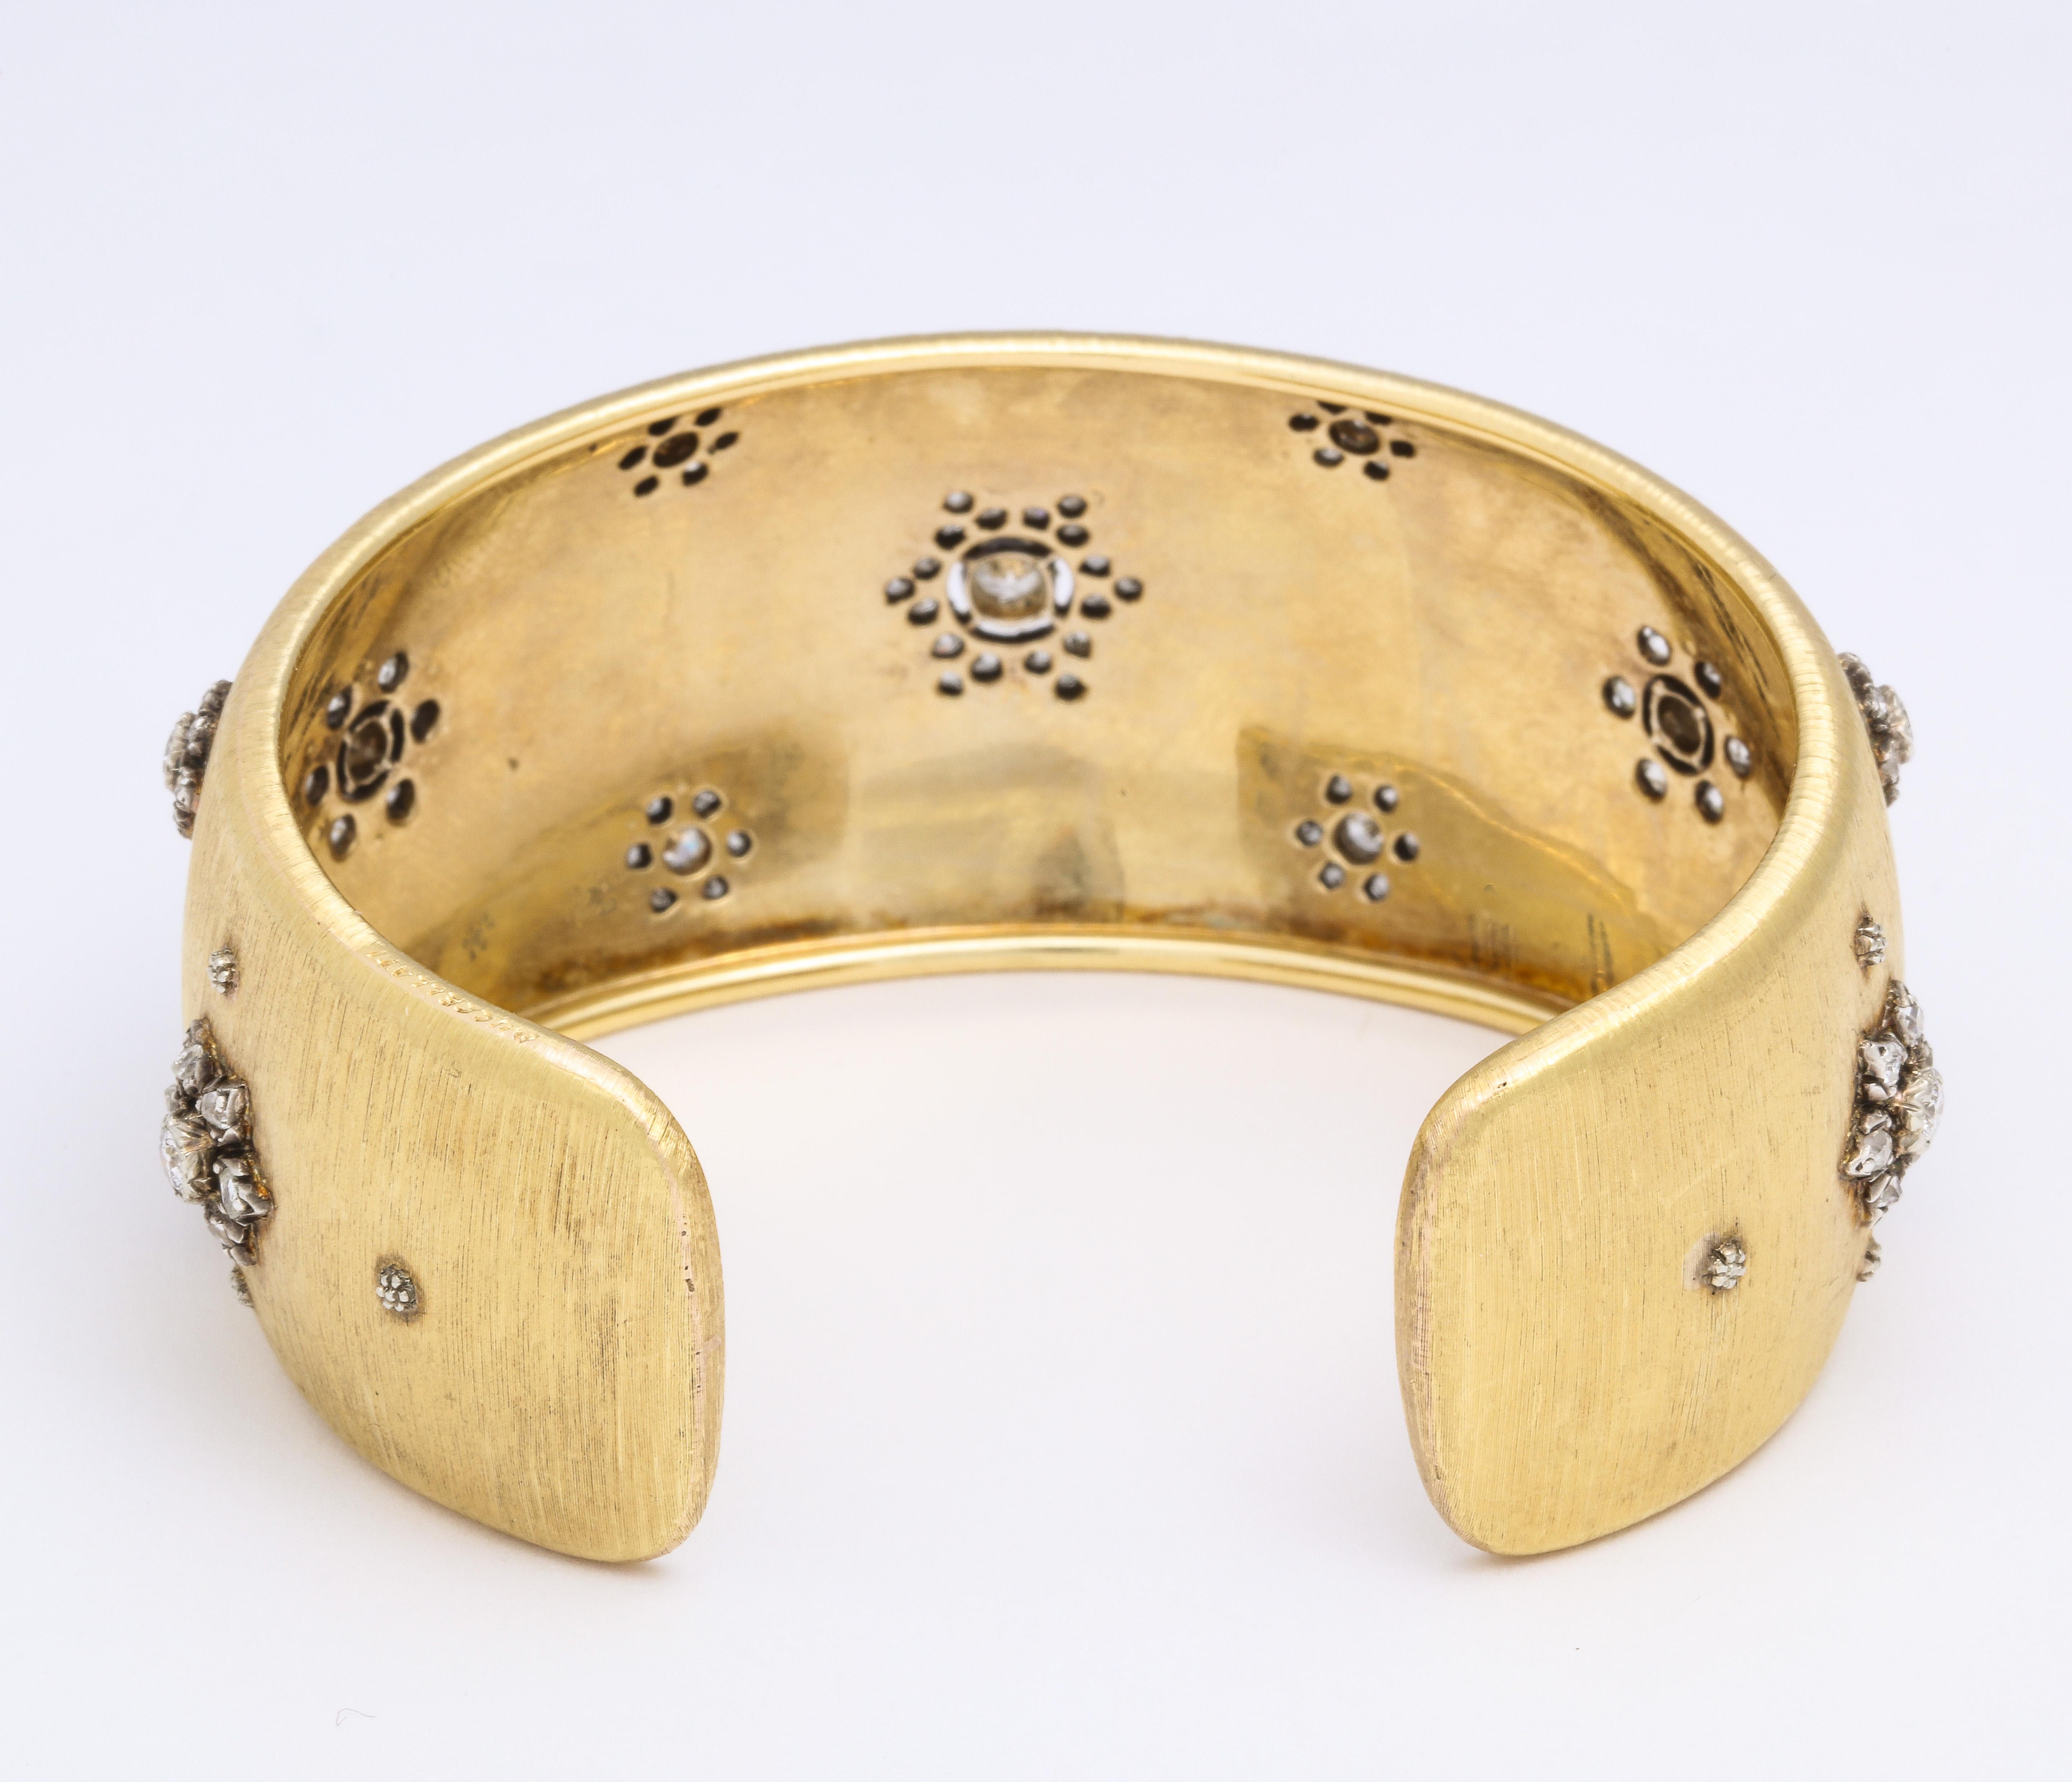 Early Mario Buccellati Gold and Diamond Cuff Bracelet For Sale 1